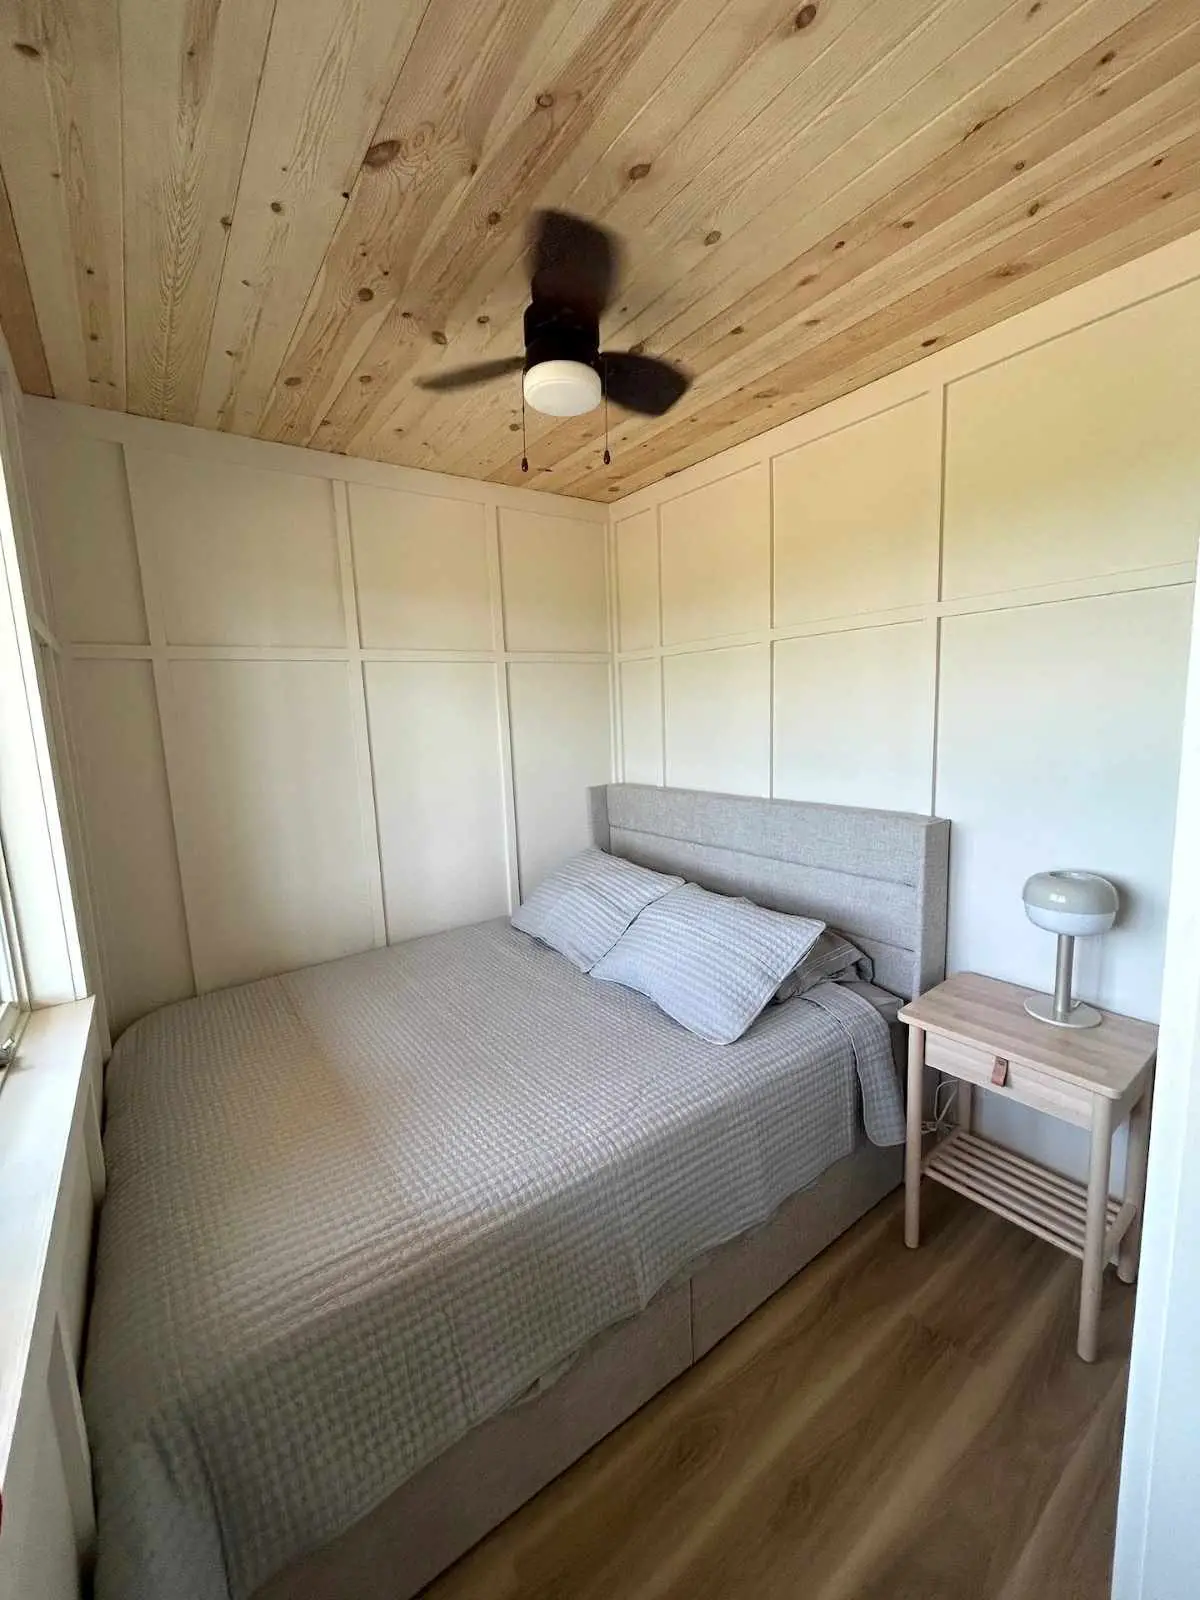 Bedroom of shipping container home in Sugarcreek, Ohio, United States